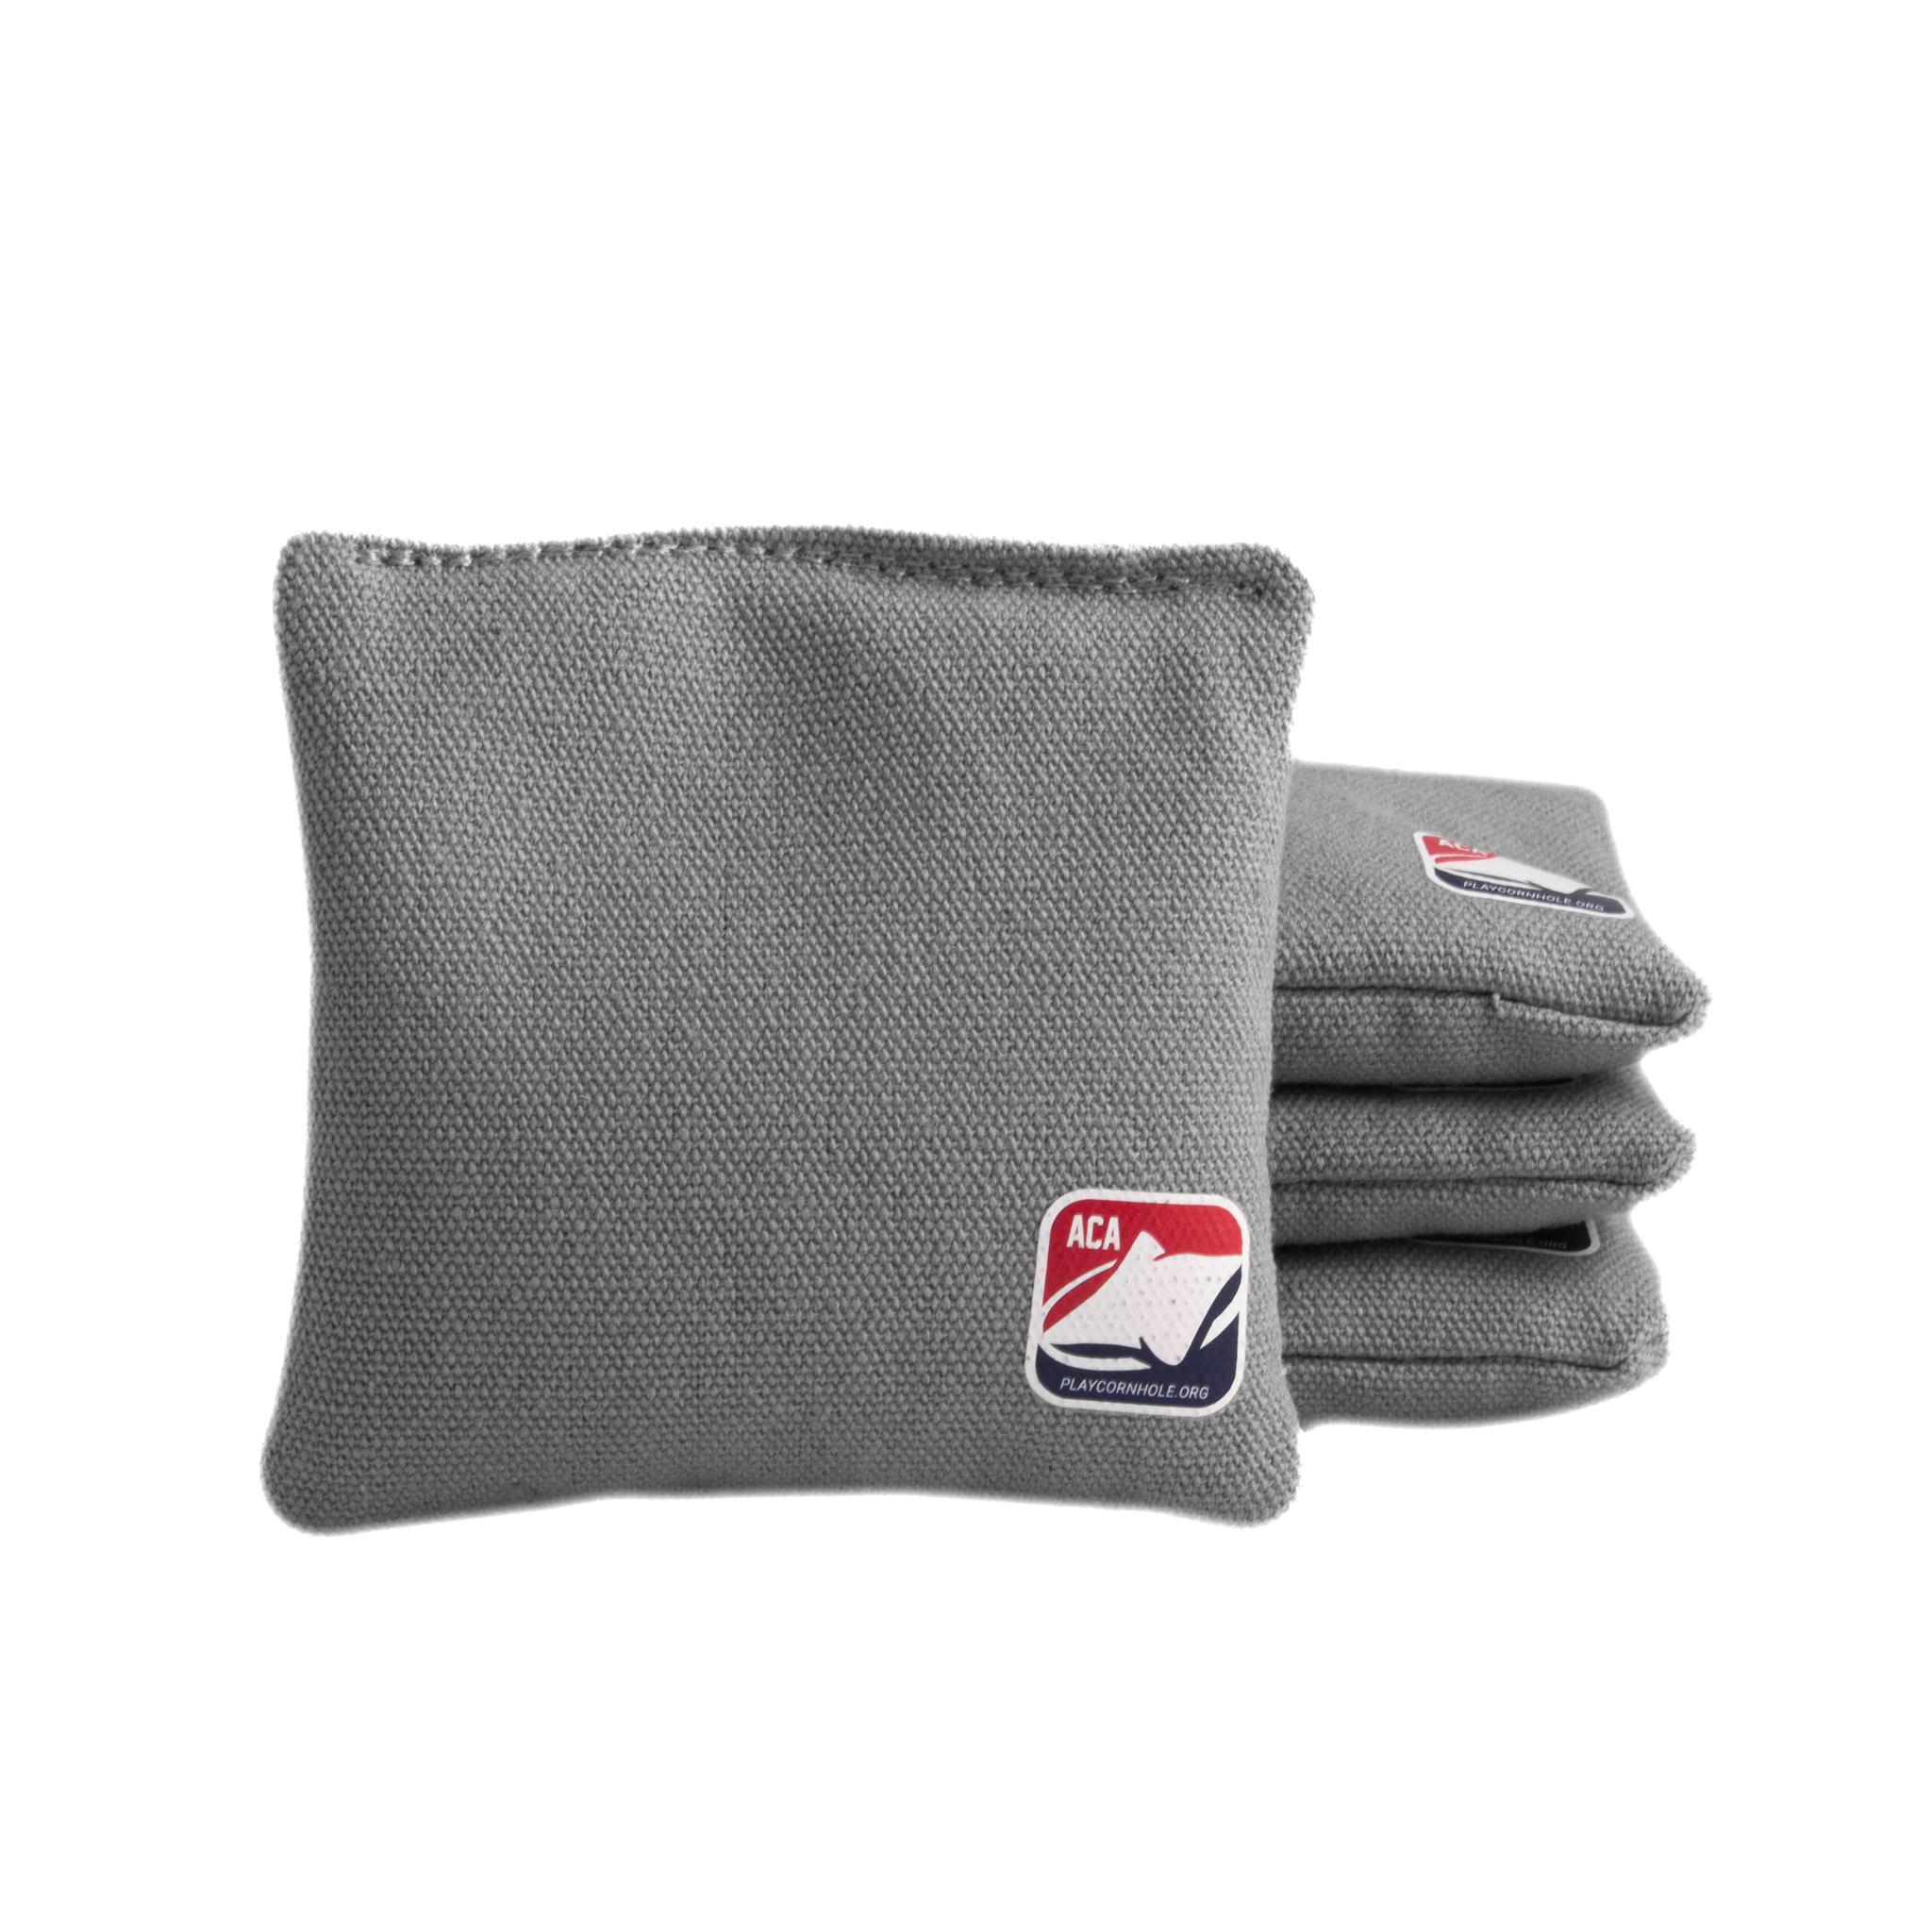 4-in Daily 44x Gray Recreational Cornhole Bags